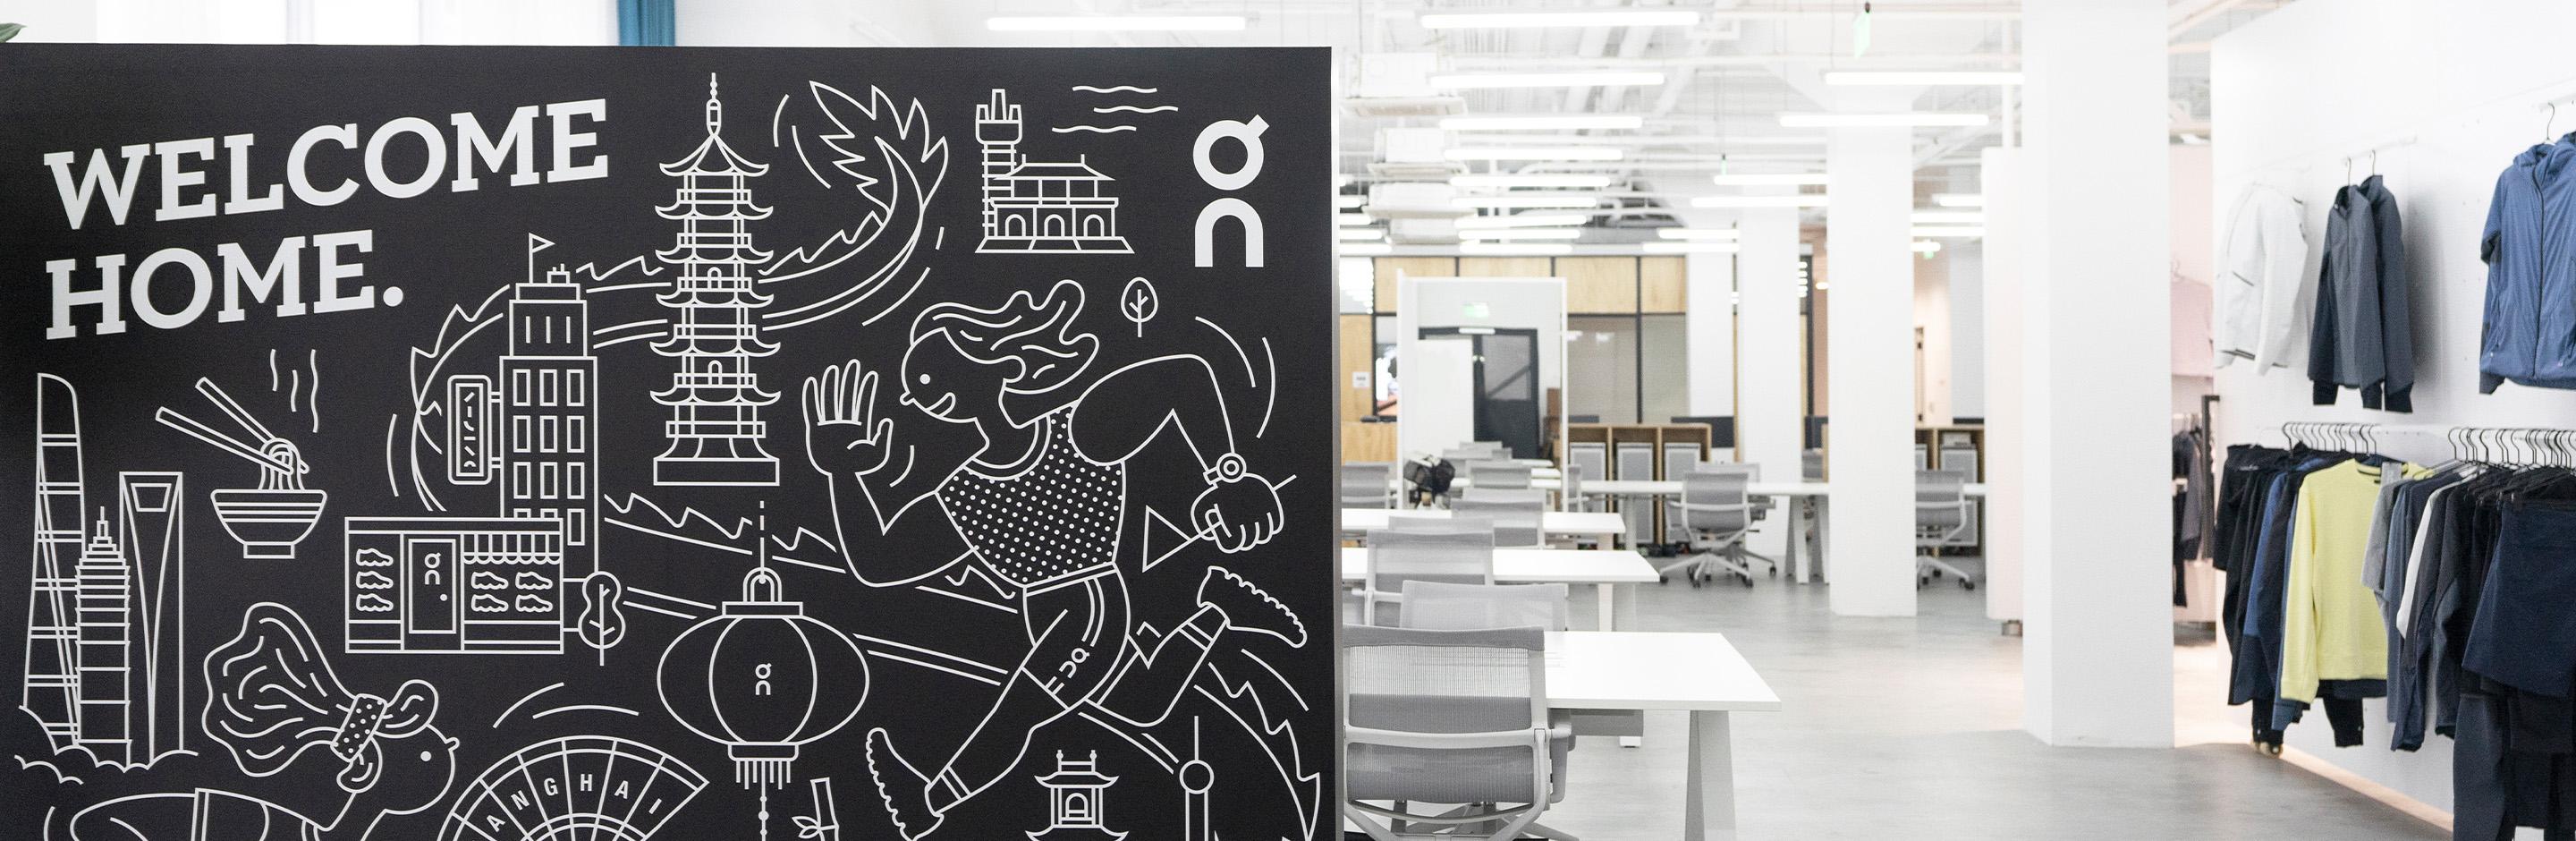 Split in half image: On the left is a Chalk board saying welcome home with a cartoon of a  running around Asian cultural references such as lanterns, noodles and buildings. The right hand side has an image of the empty office with apparel hung on the wall. 